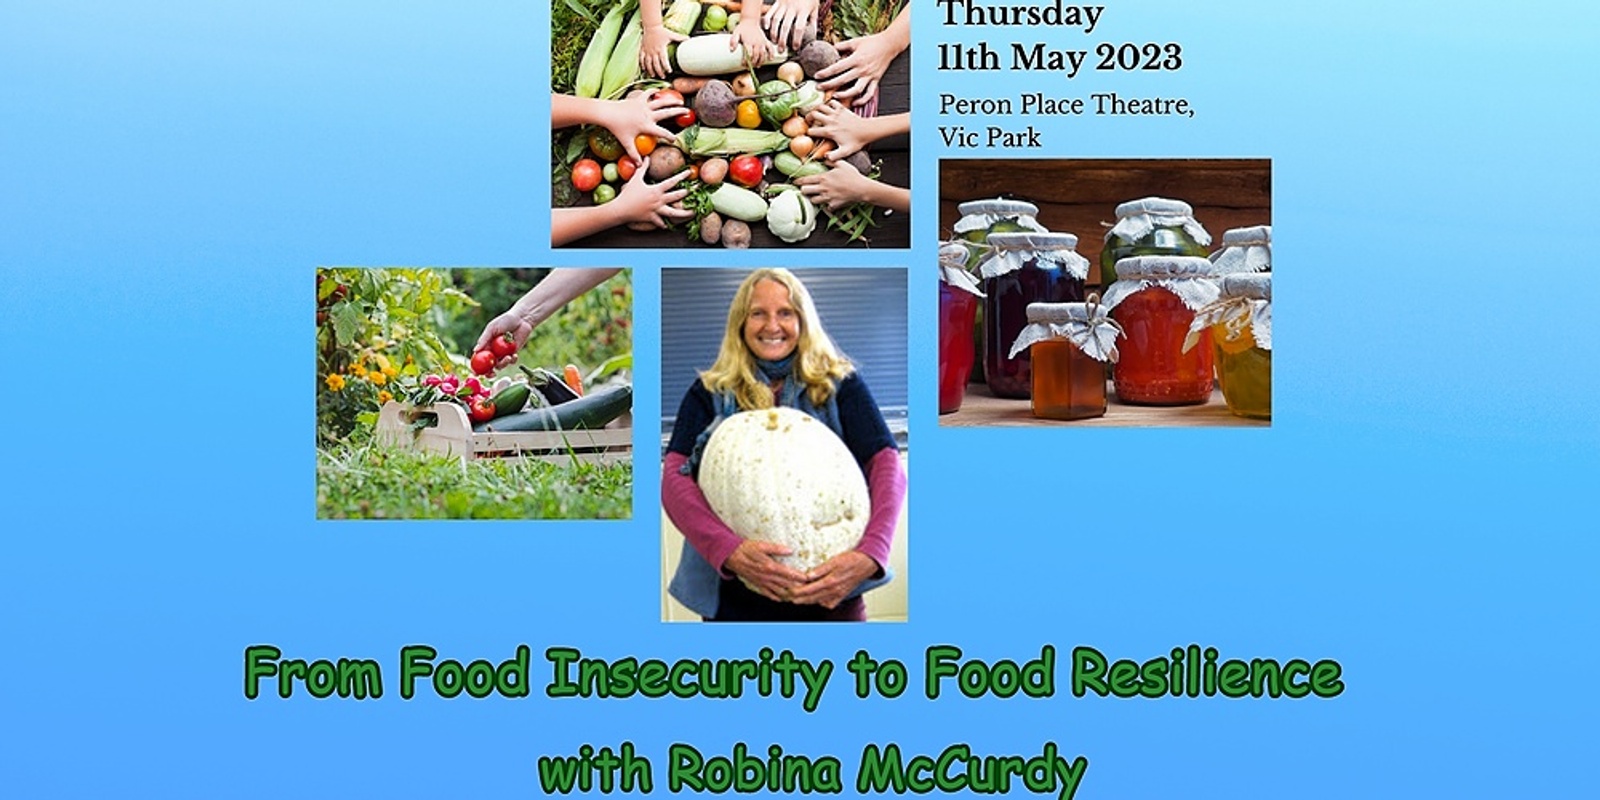 Banner image for An evening with Robina McCurdy:  From Food Insecurity to Food Resilience